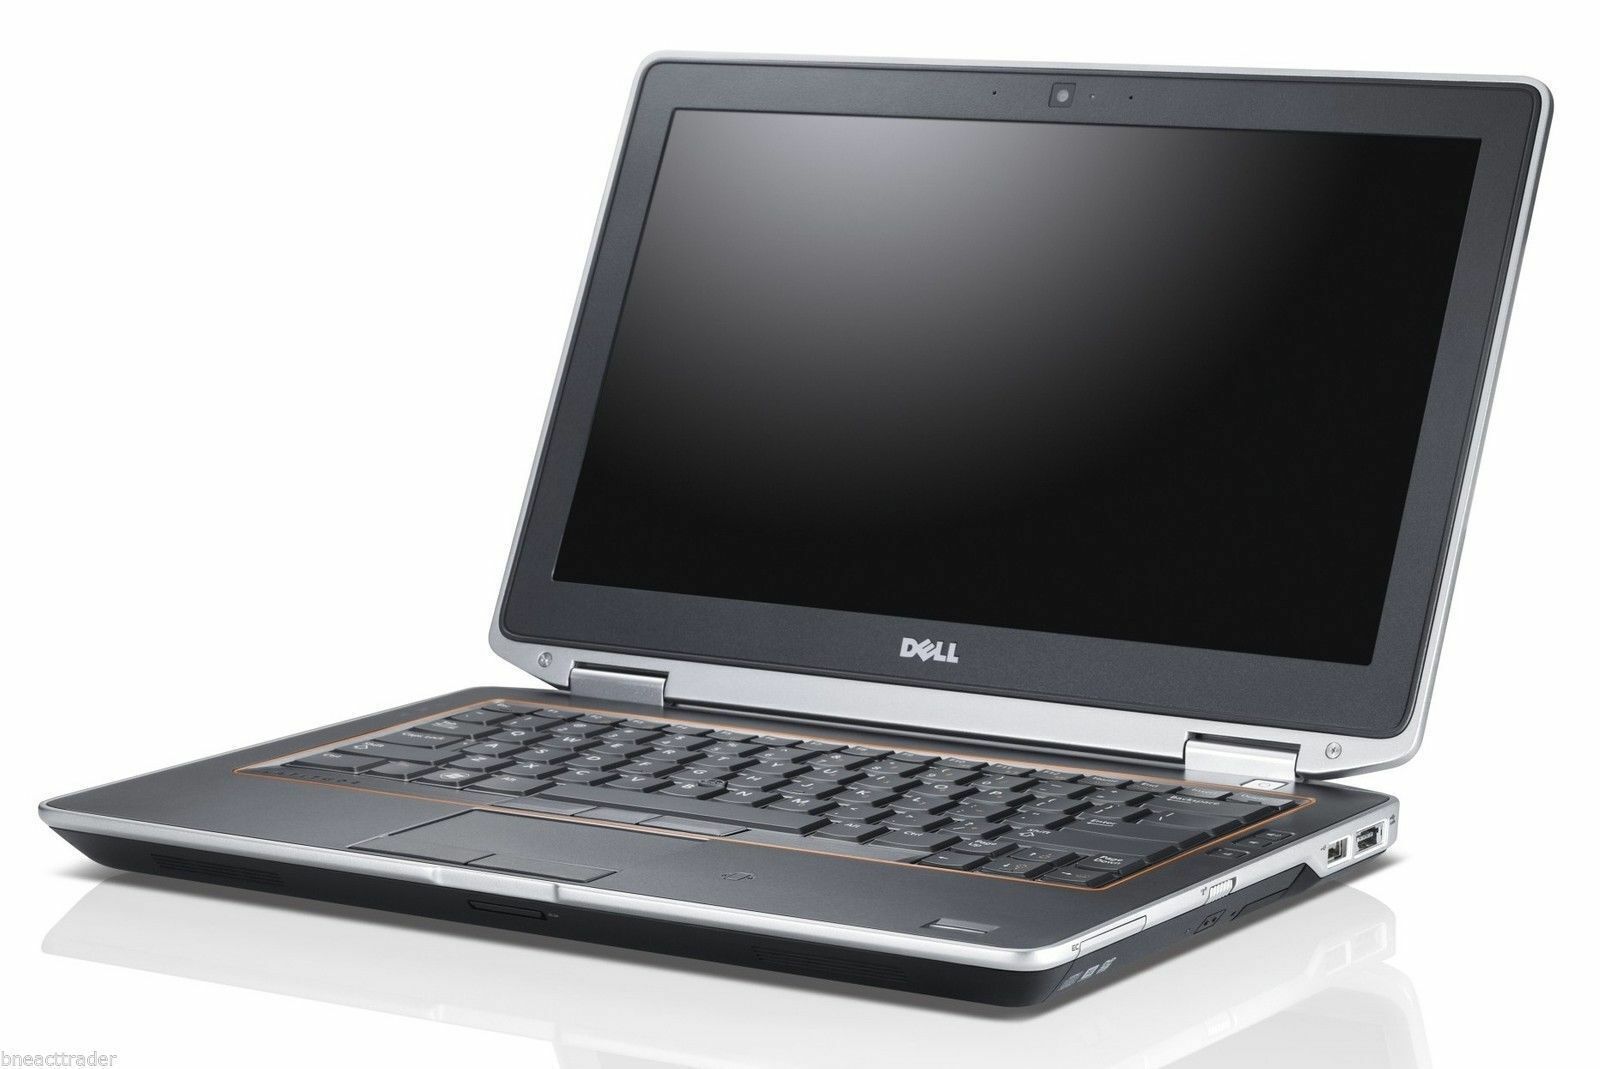 Dell Latitude E6420 Core i5 2540m 2.6Ghz 4GB RAM 250GB HDD NO OS  Notebook Full Size Image